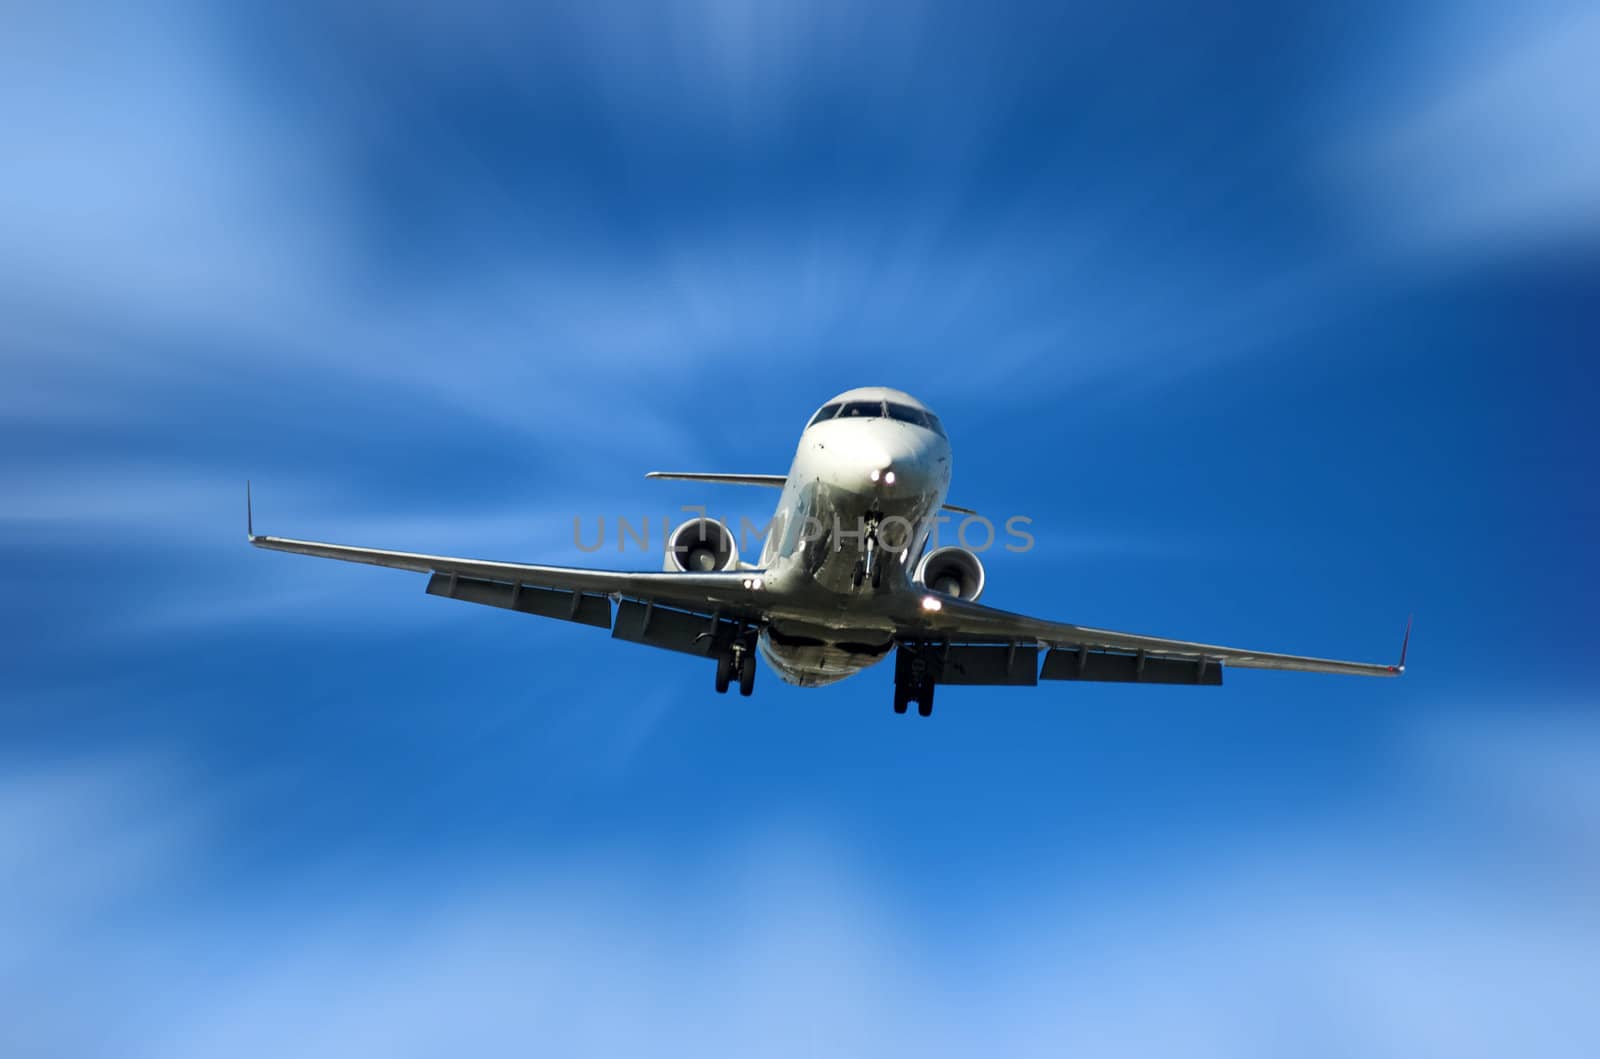 Corporate Jet fast approaching airport for landing